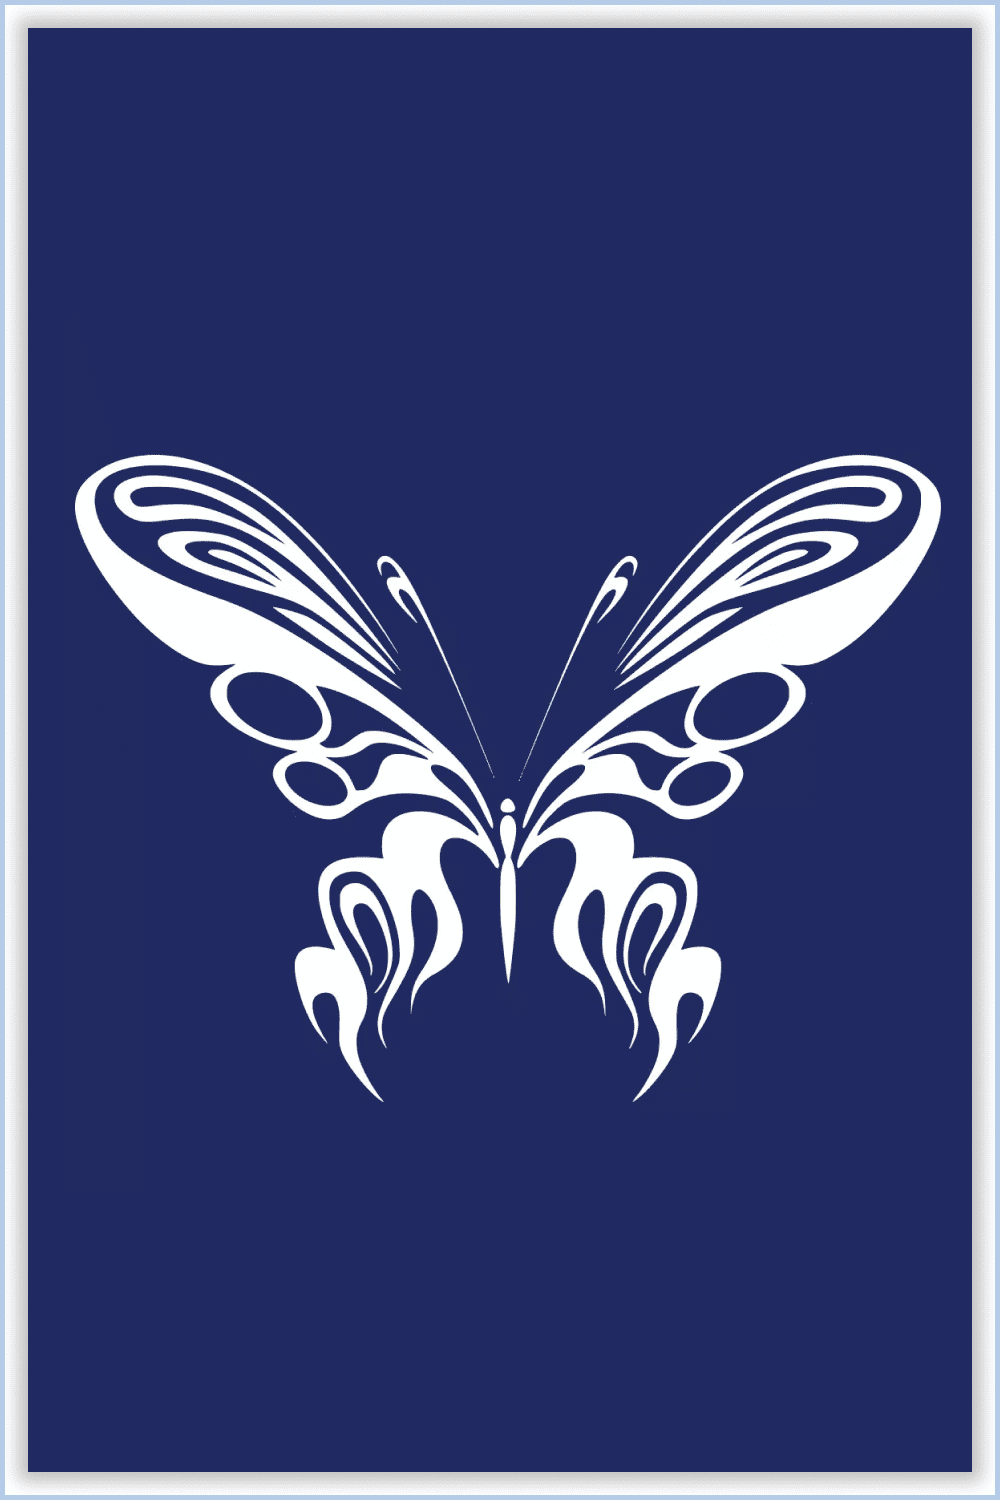 White silhouette of a butterfly with long whiskers on a blue background.